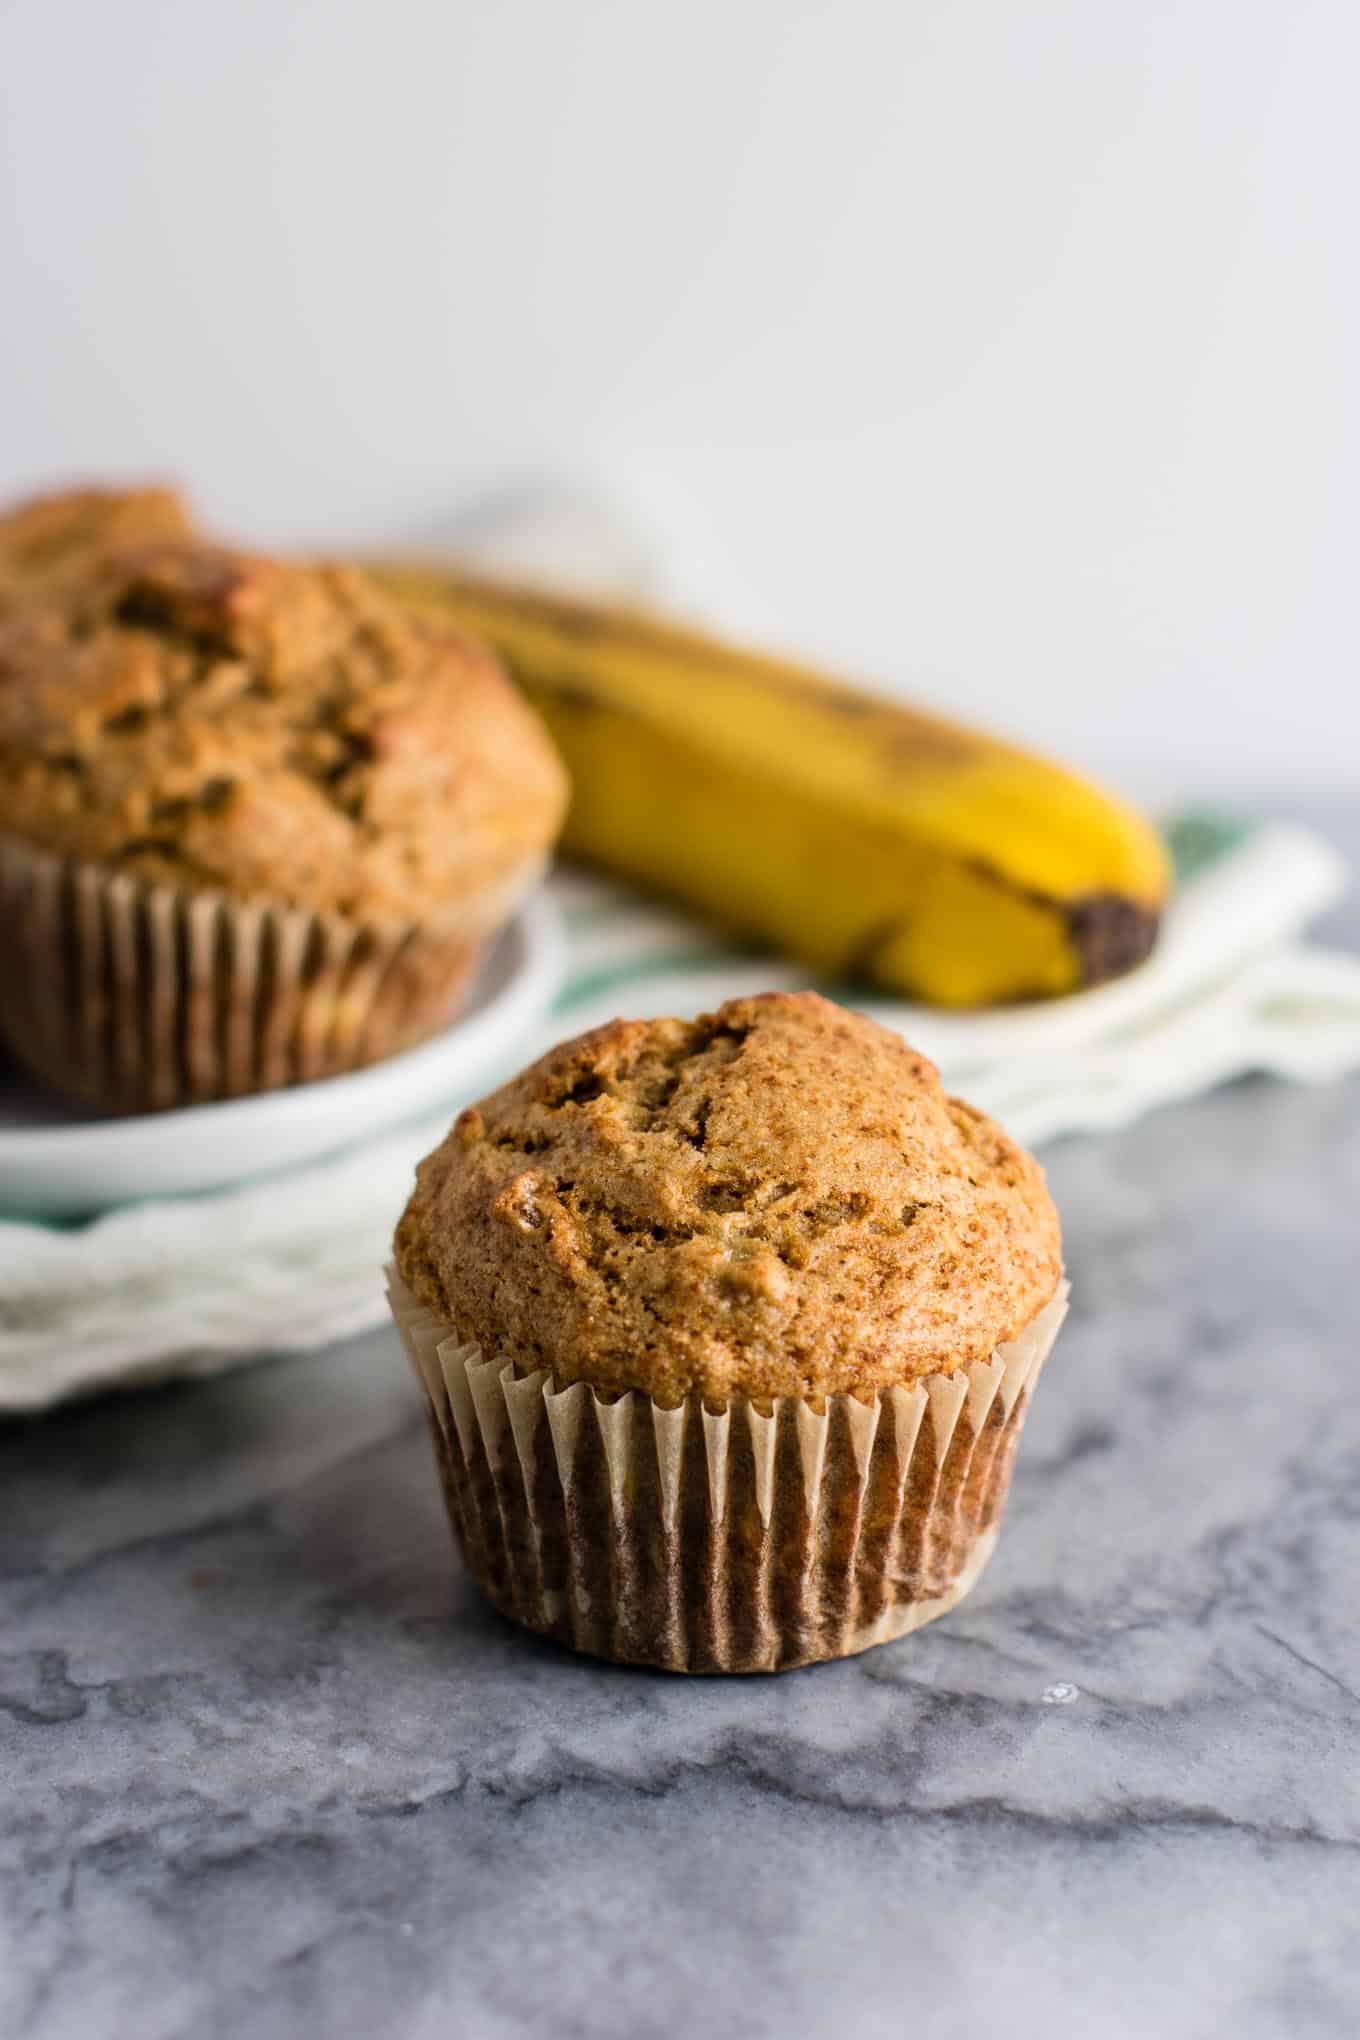 Whole Wheat Banana Bread Muffins Recipe (naturally sweetened) A wholesome snack or breakfast that both kids and adults will love! #wholewheat #bananabreadmuffins #healthybreakfast #muffins #bananabread